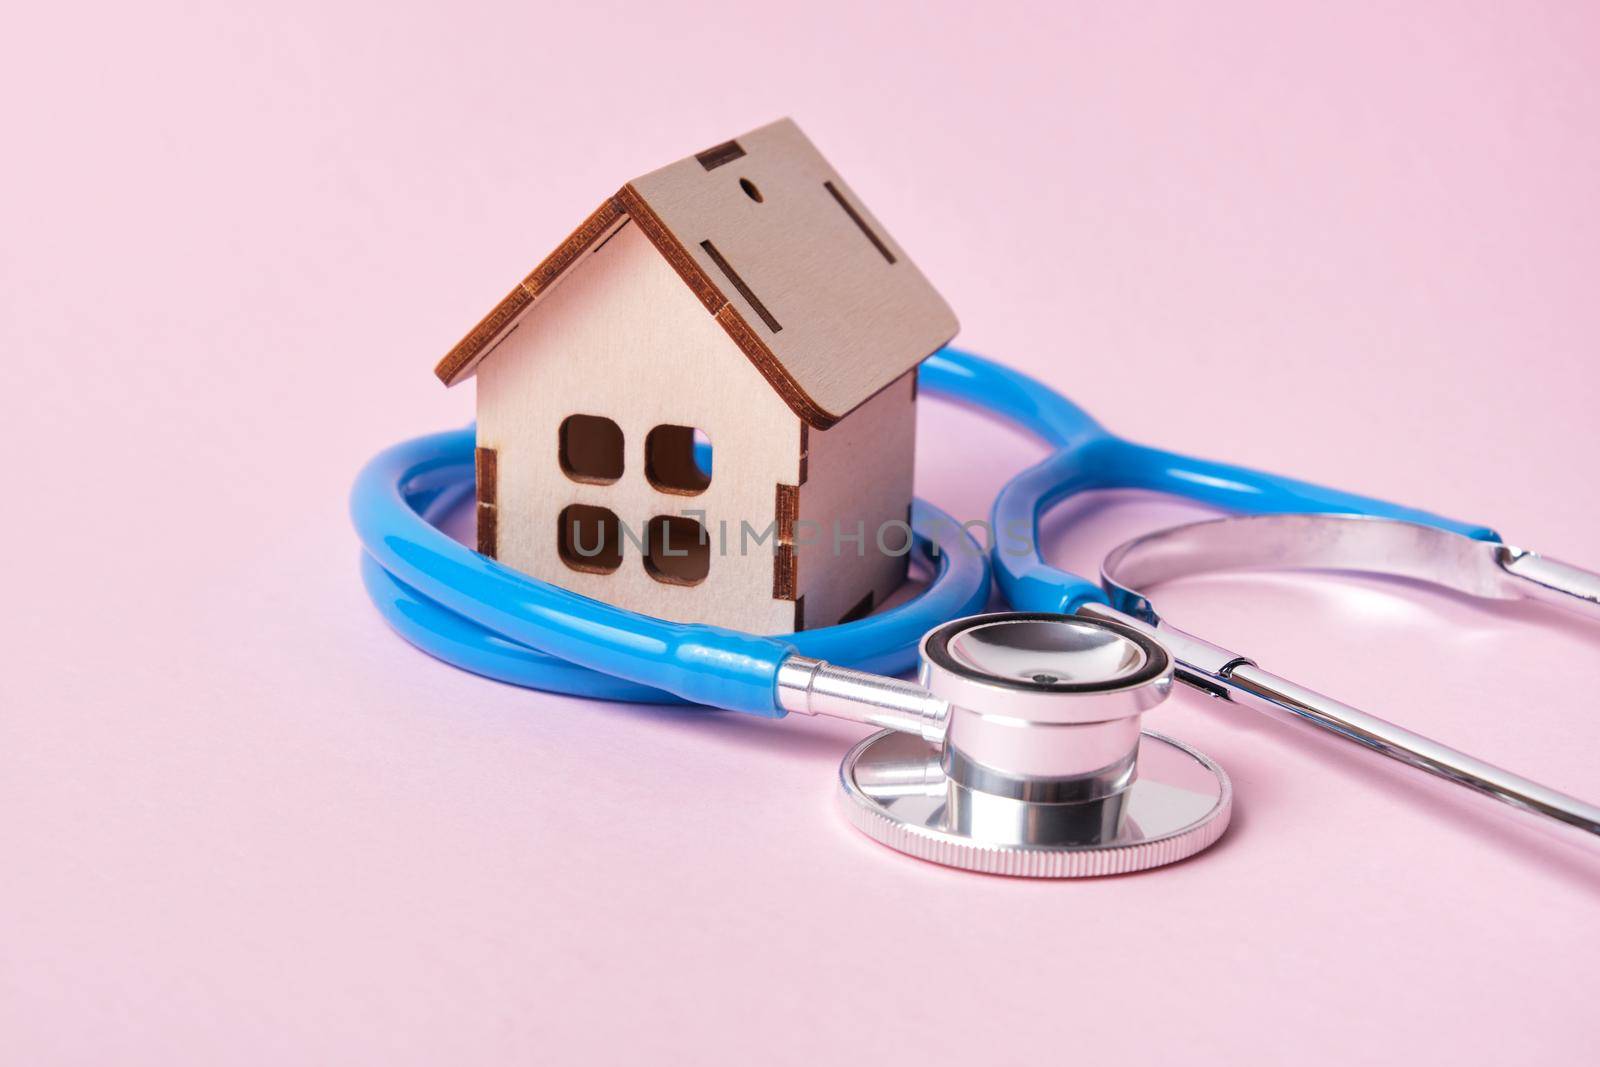 Medical stethoscope and toy house on a pink background with copy space by natashko